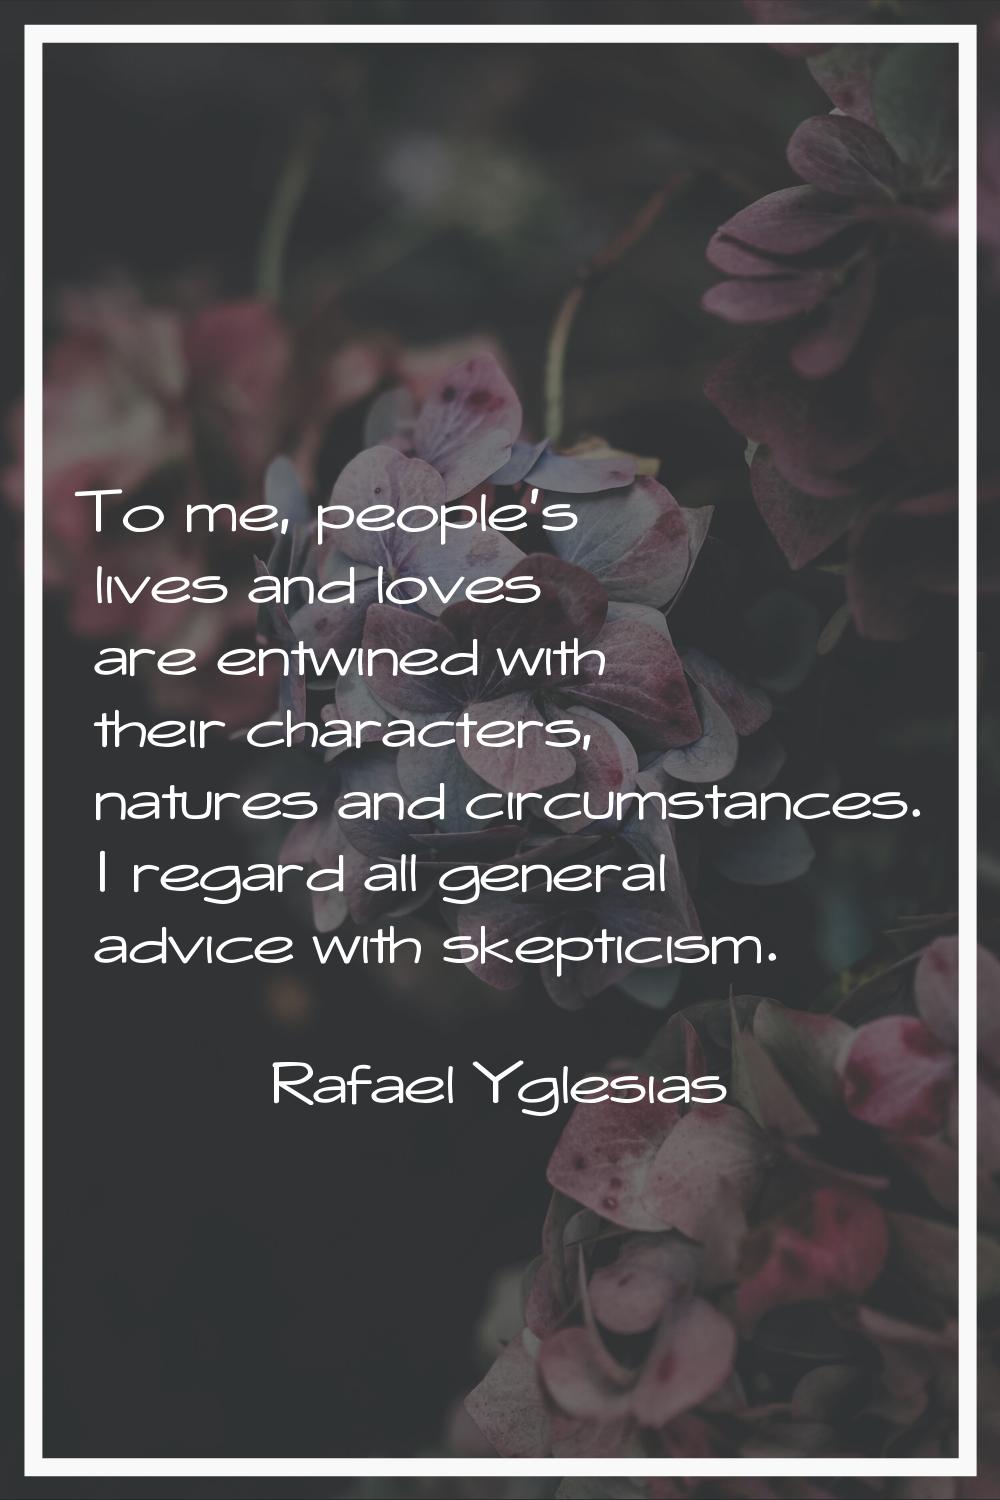 To me, people's lives and loves are entwined with their characters, natures and circumstances. I re